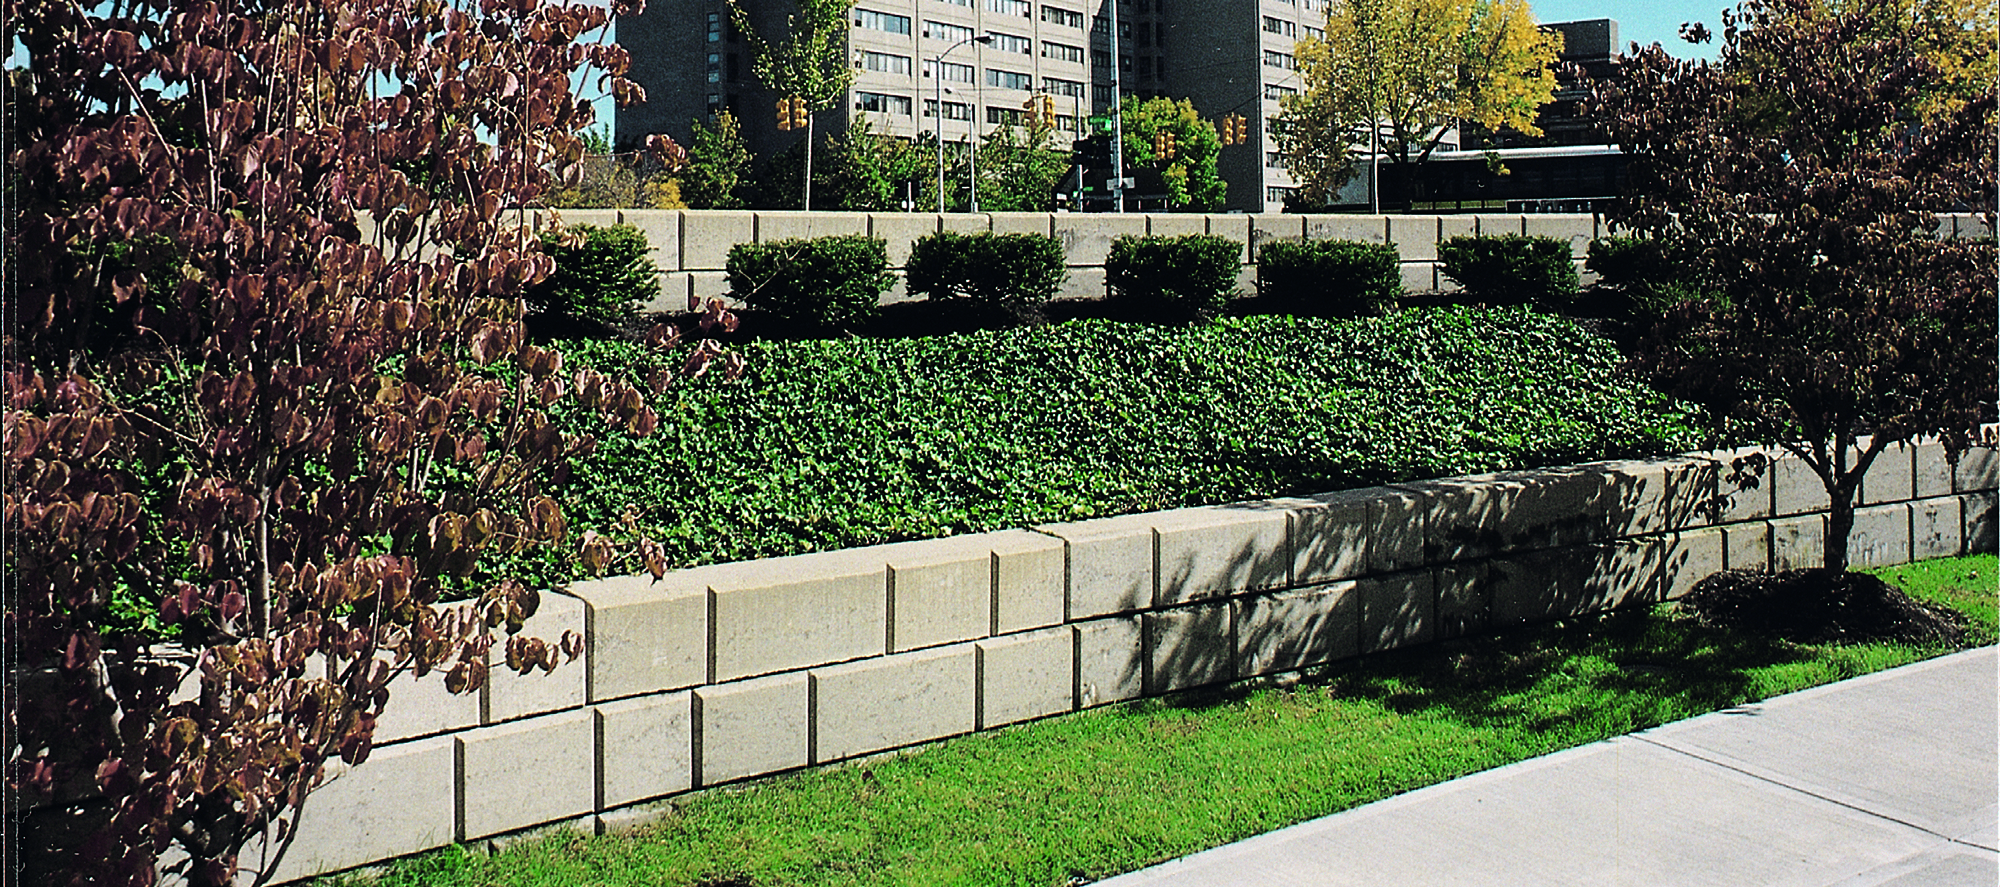 A DuraHold2 retaining wall helps to break up green spaces, while accounting for changes in elevation outside the building.